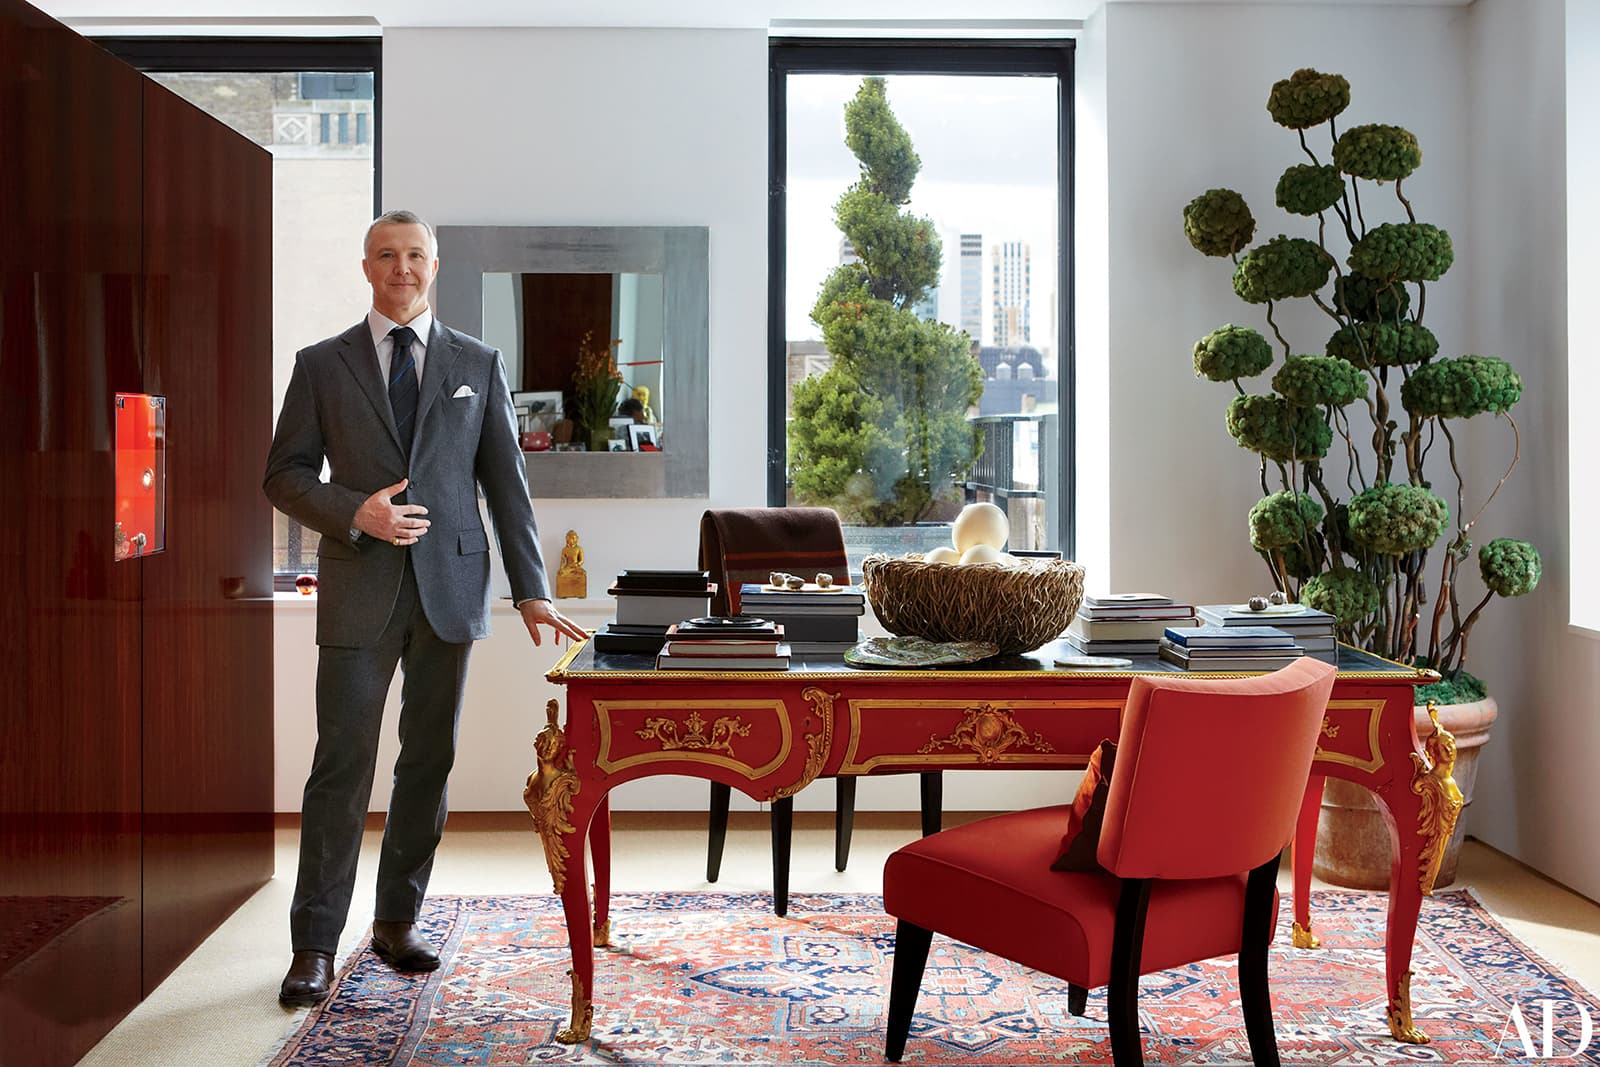 James Claude Taffin de Givenchy, founder of Taffin in his New York showroom. Image courtesy of Architectural Digest